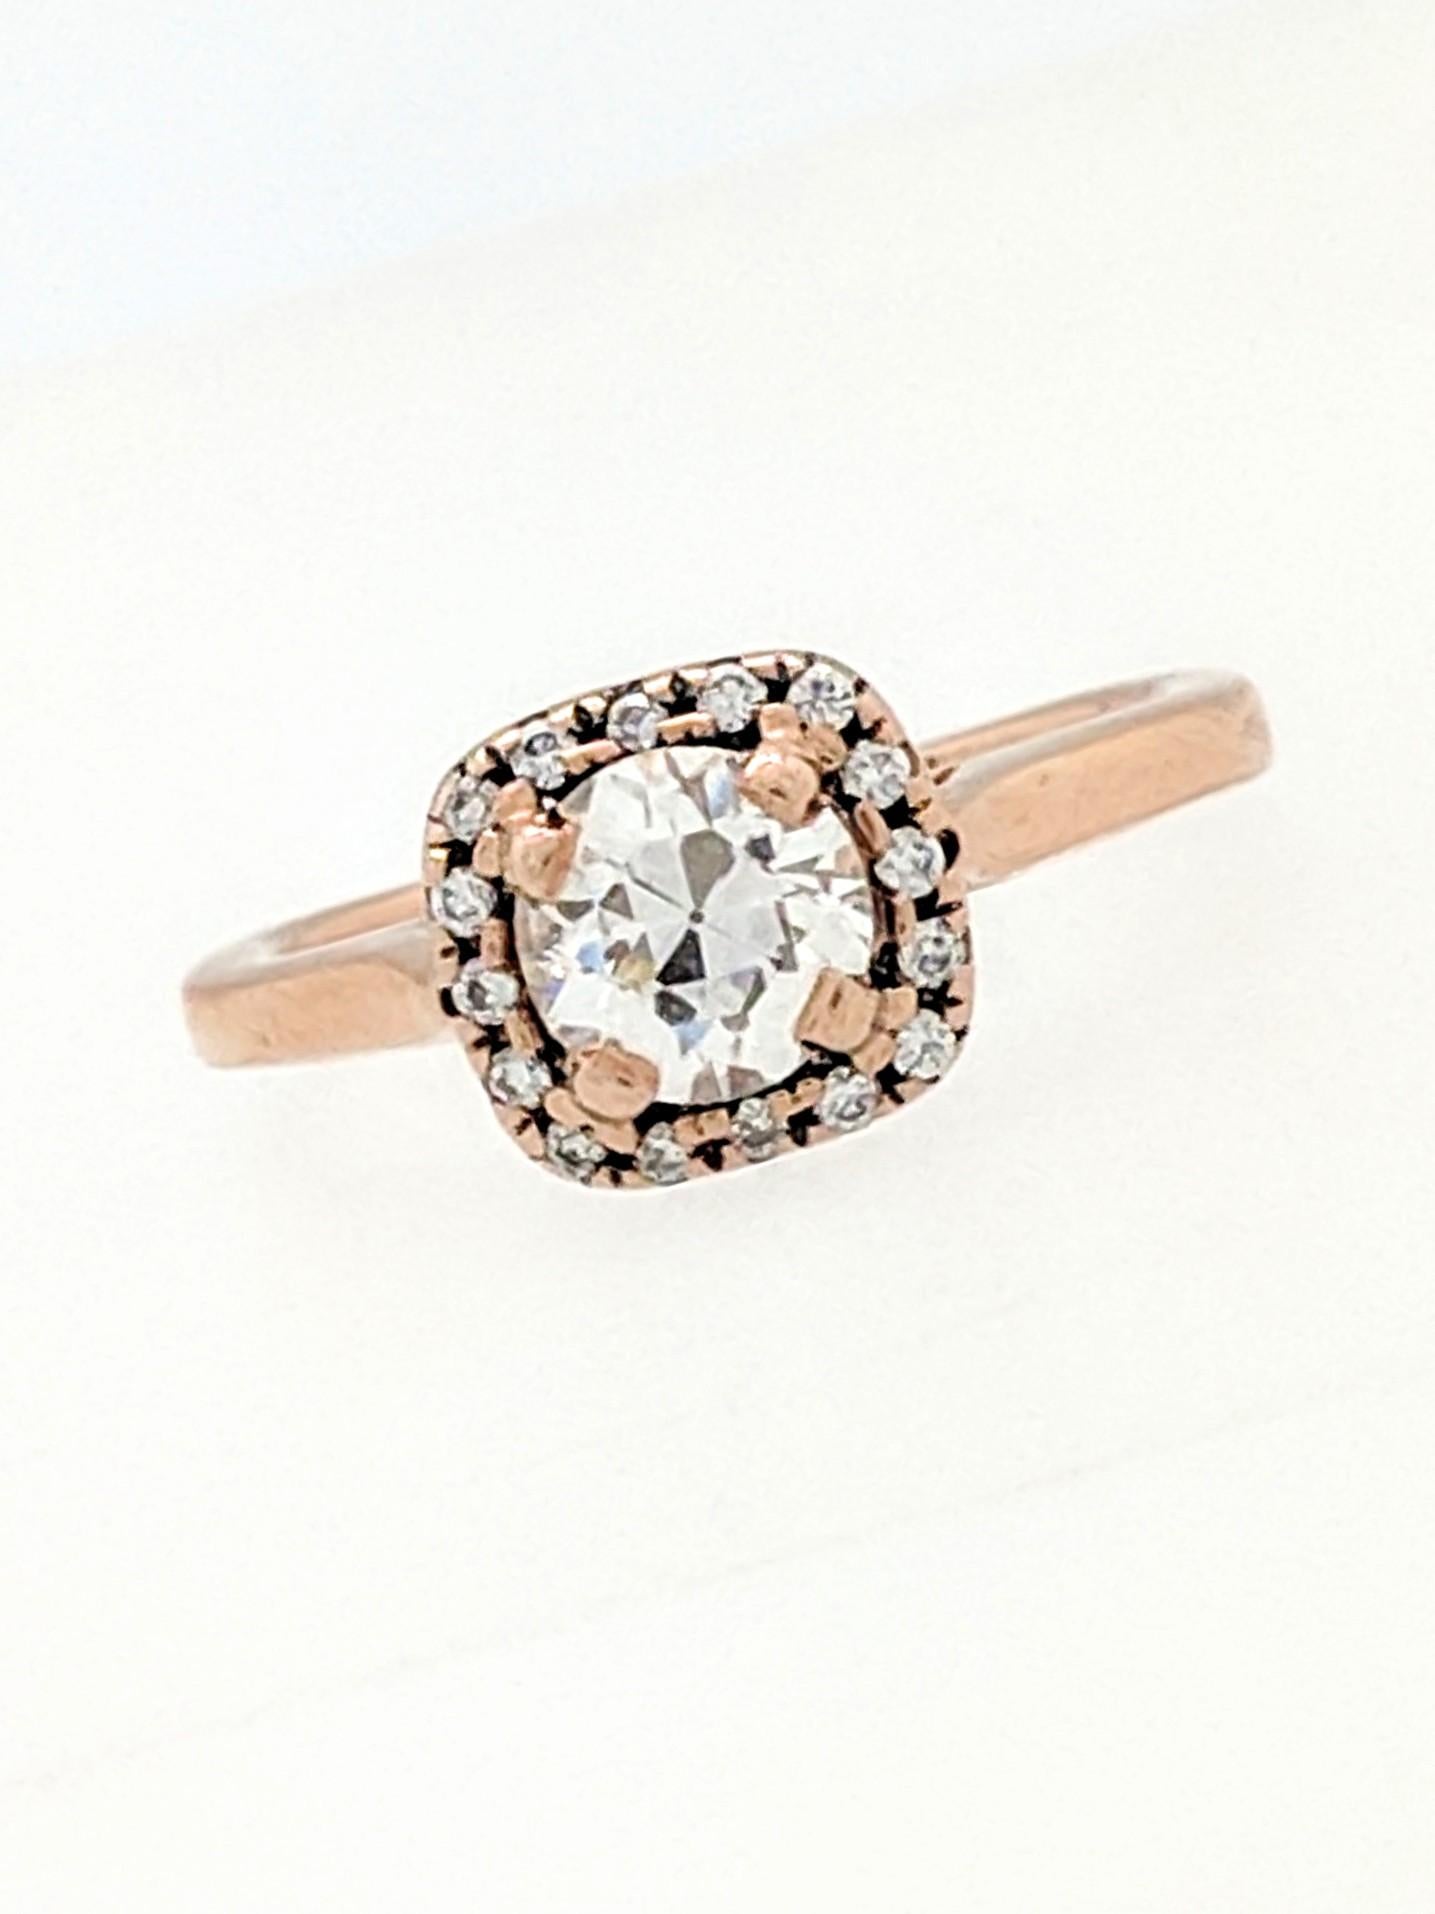 .50 ct. Round Diamond 14k Rose Gold Diamond Halo Engagement Ring

You are viewing a Beautiful .50 ct. Round Diamond displayed in a 14k rose gold Halo engagement ring setting. This ring features a .50 carat round natural diamond as the center piece.